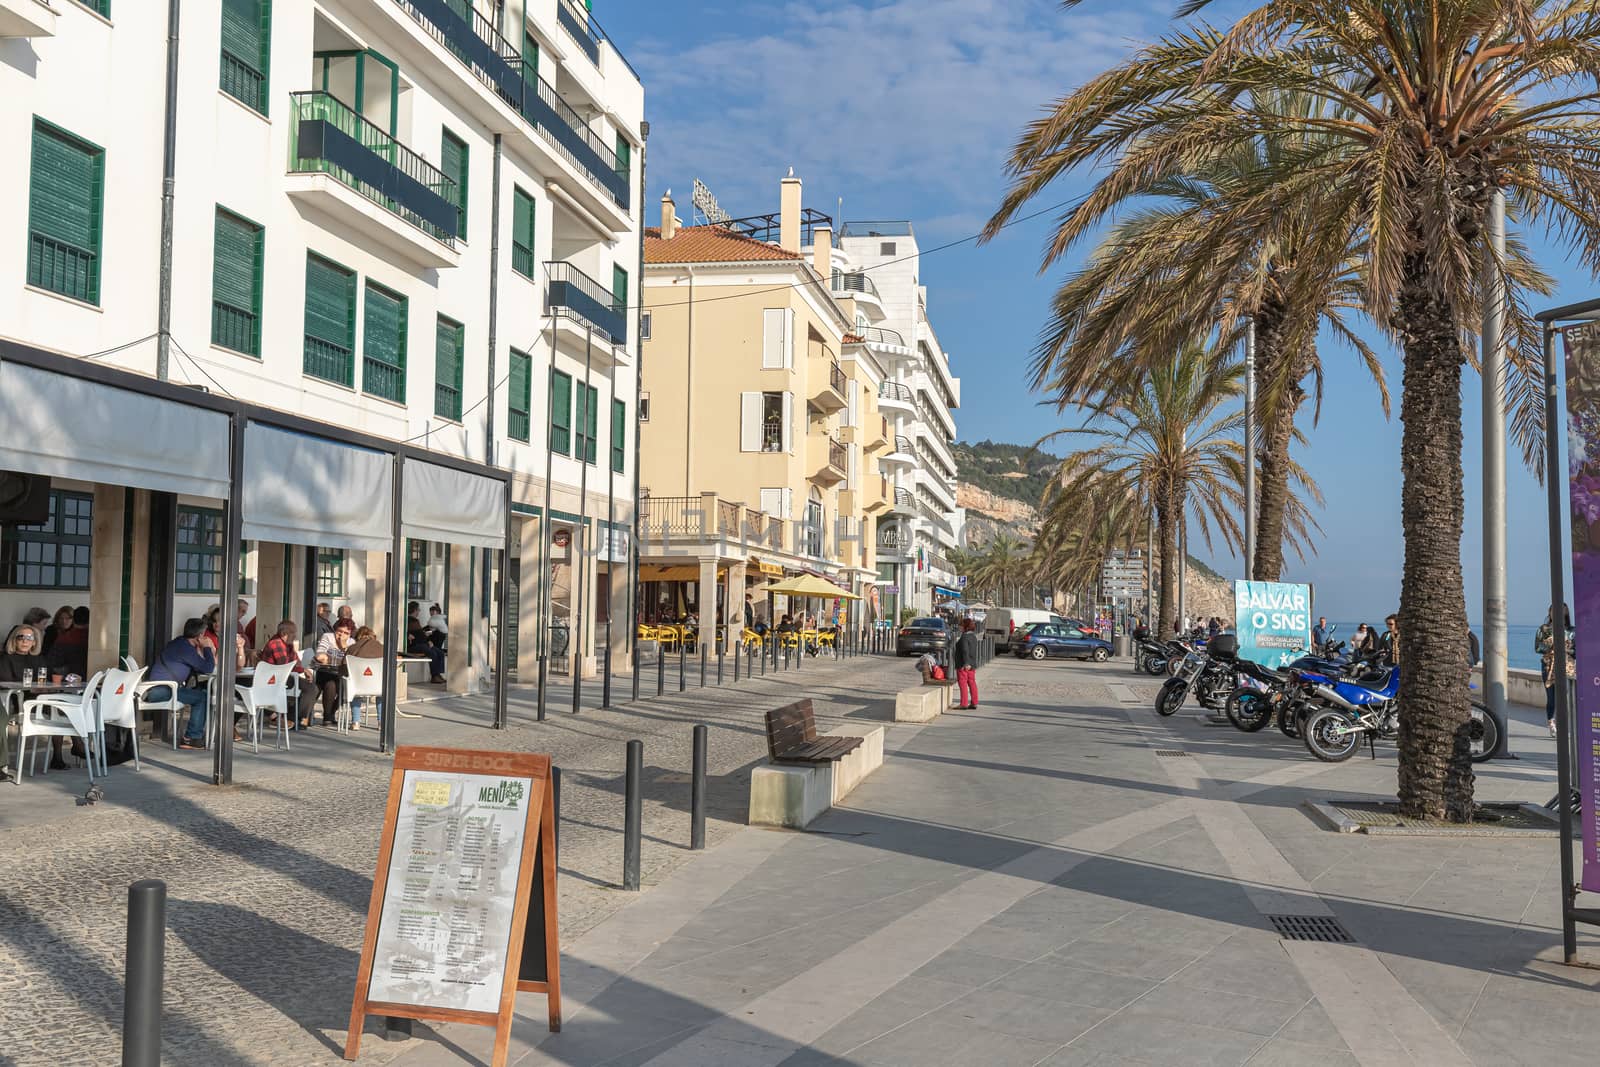 Sesimbra, Portugal - February 20, 2020: View of the city center of Sesimbra by the sea where people are walking on a winter day